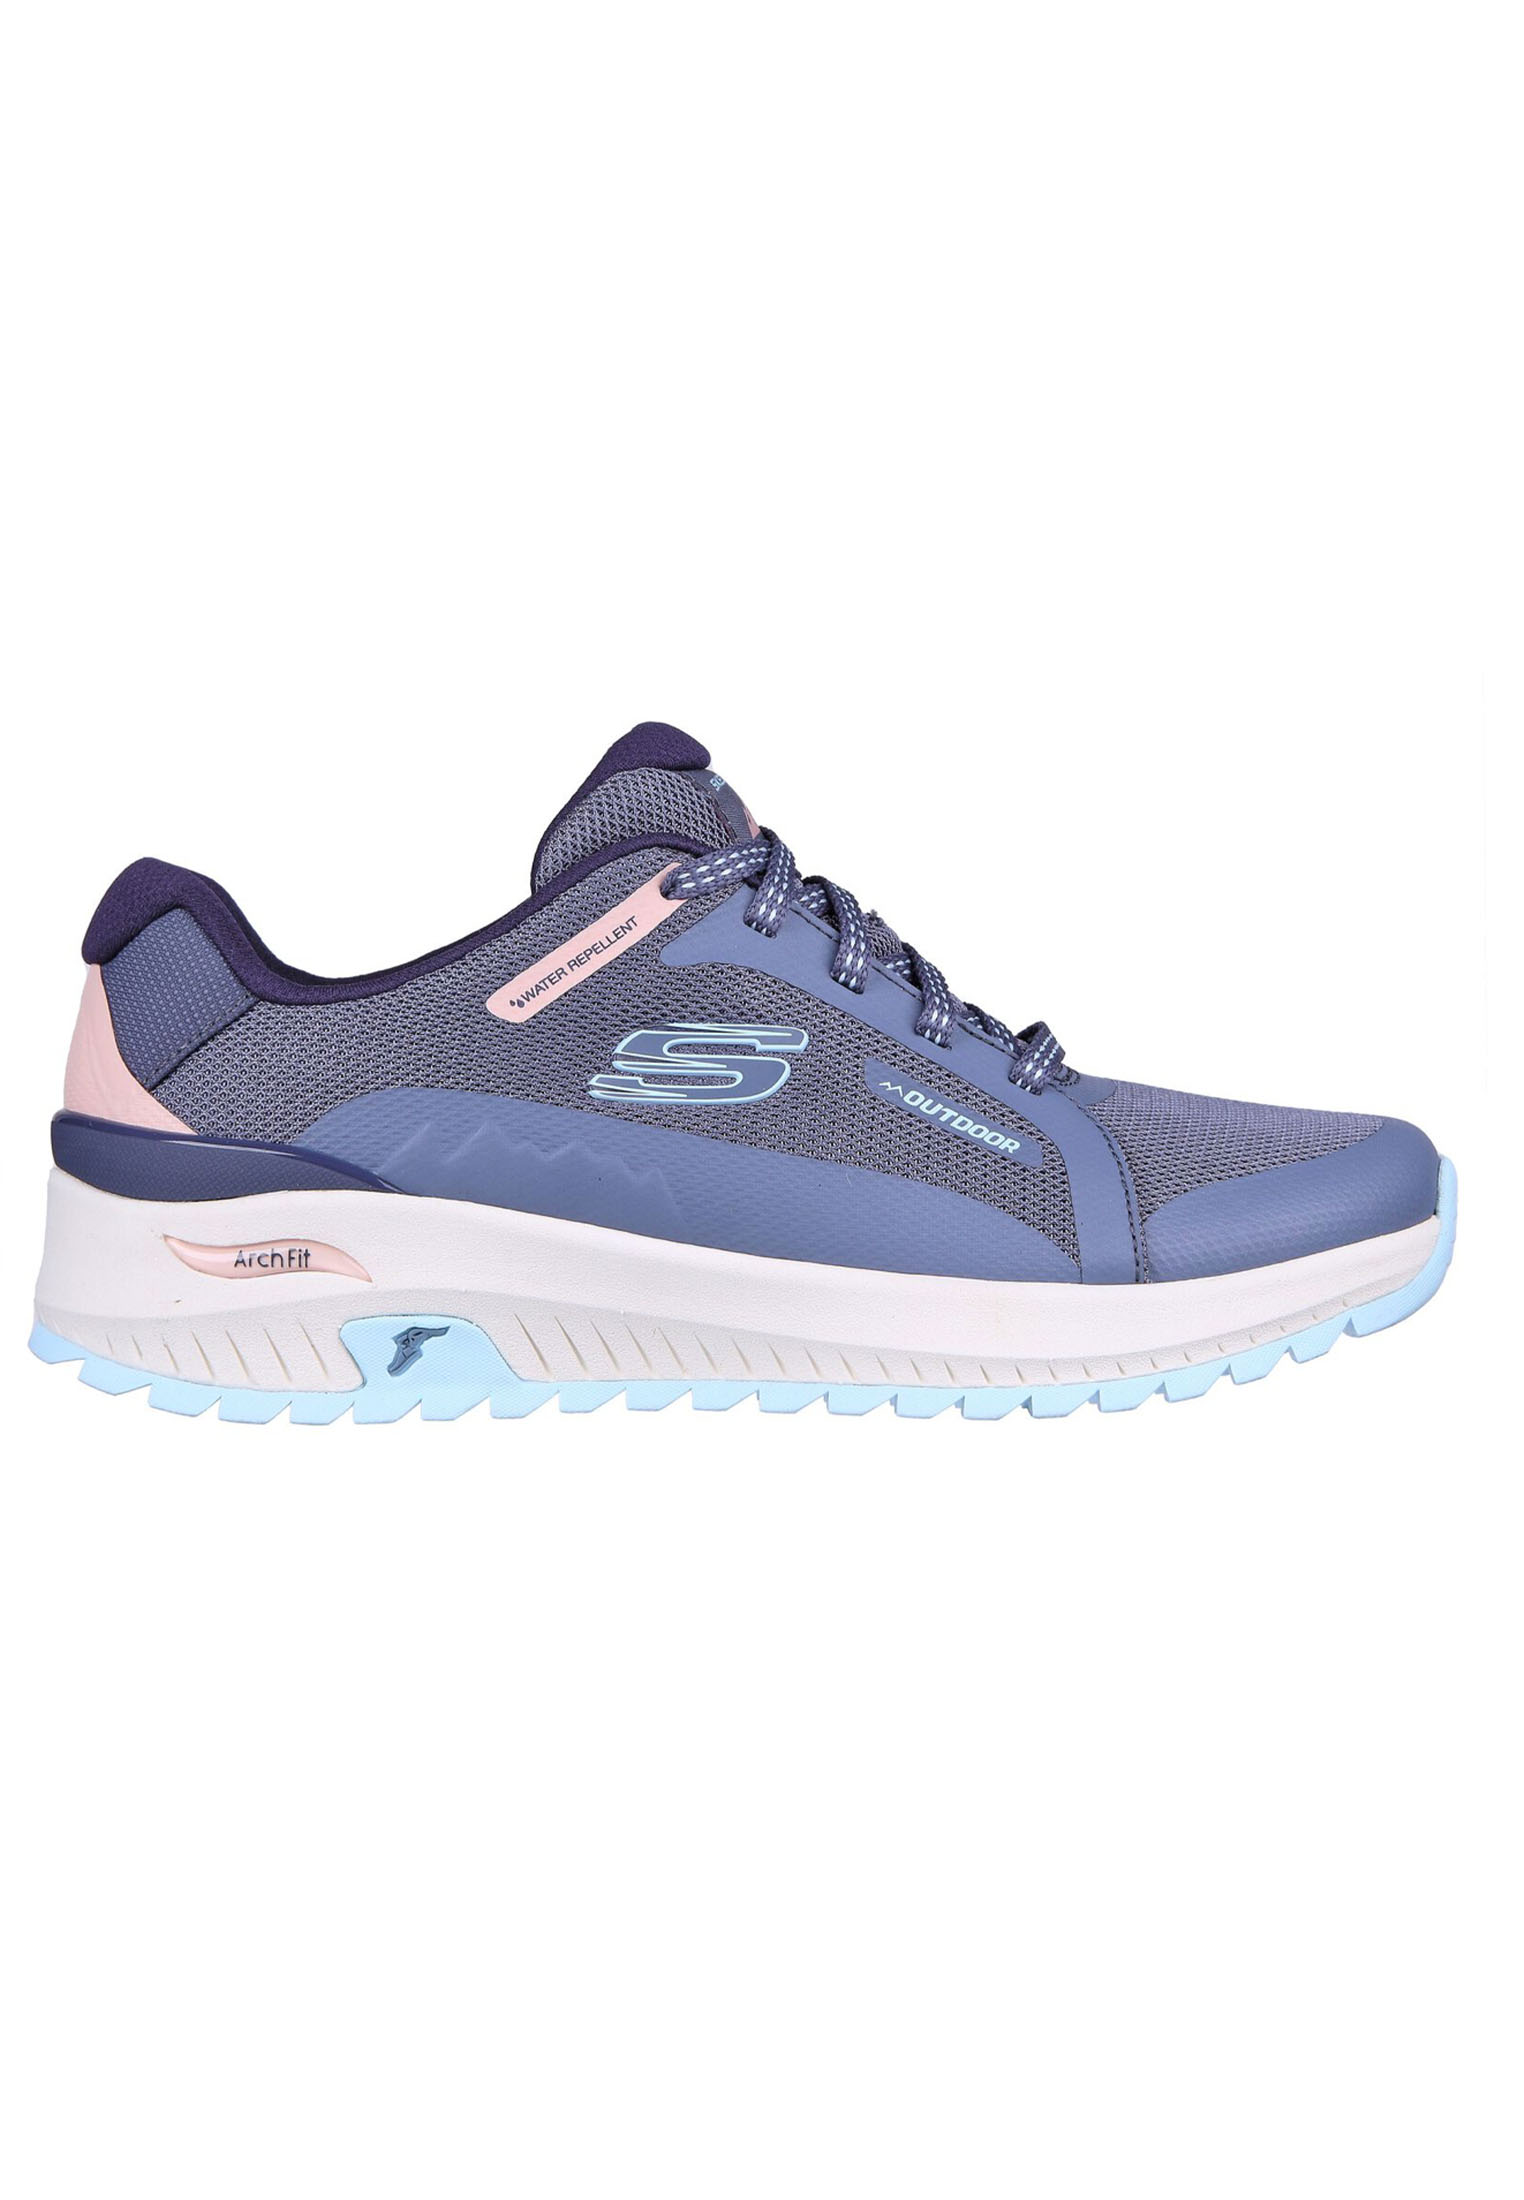 Skechers ARCH FIT DISCOVER dames sneakers - Blauw - Maat 37